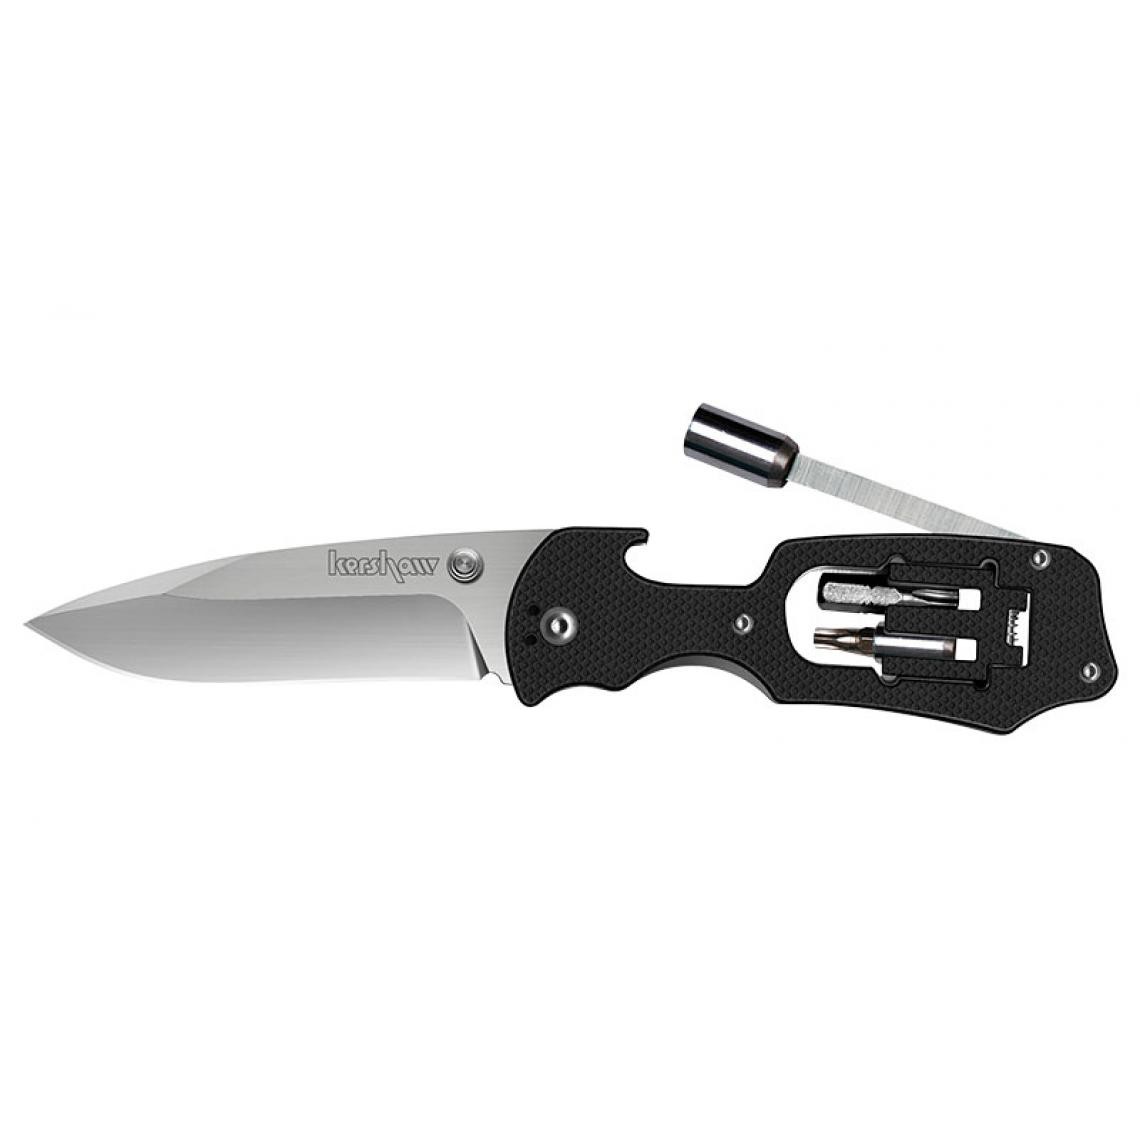 Divers Marques - KERSHAW - KW1920 - SELECT FIRE - Outils de coupe